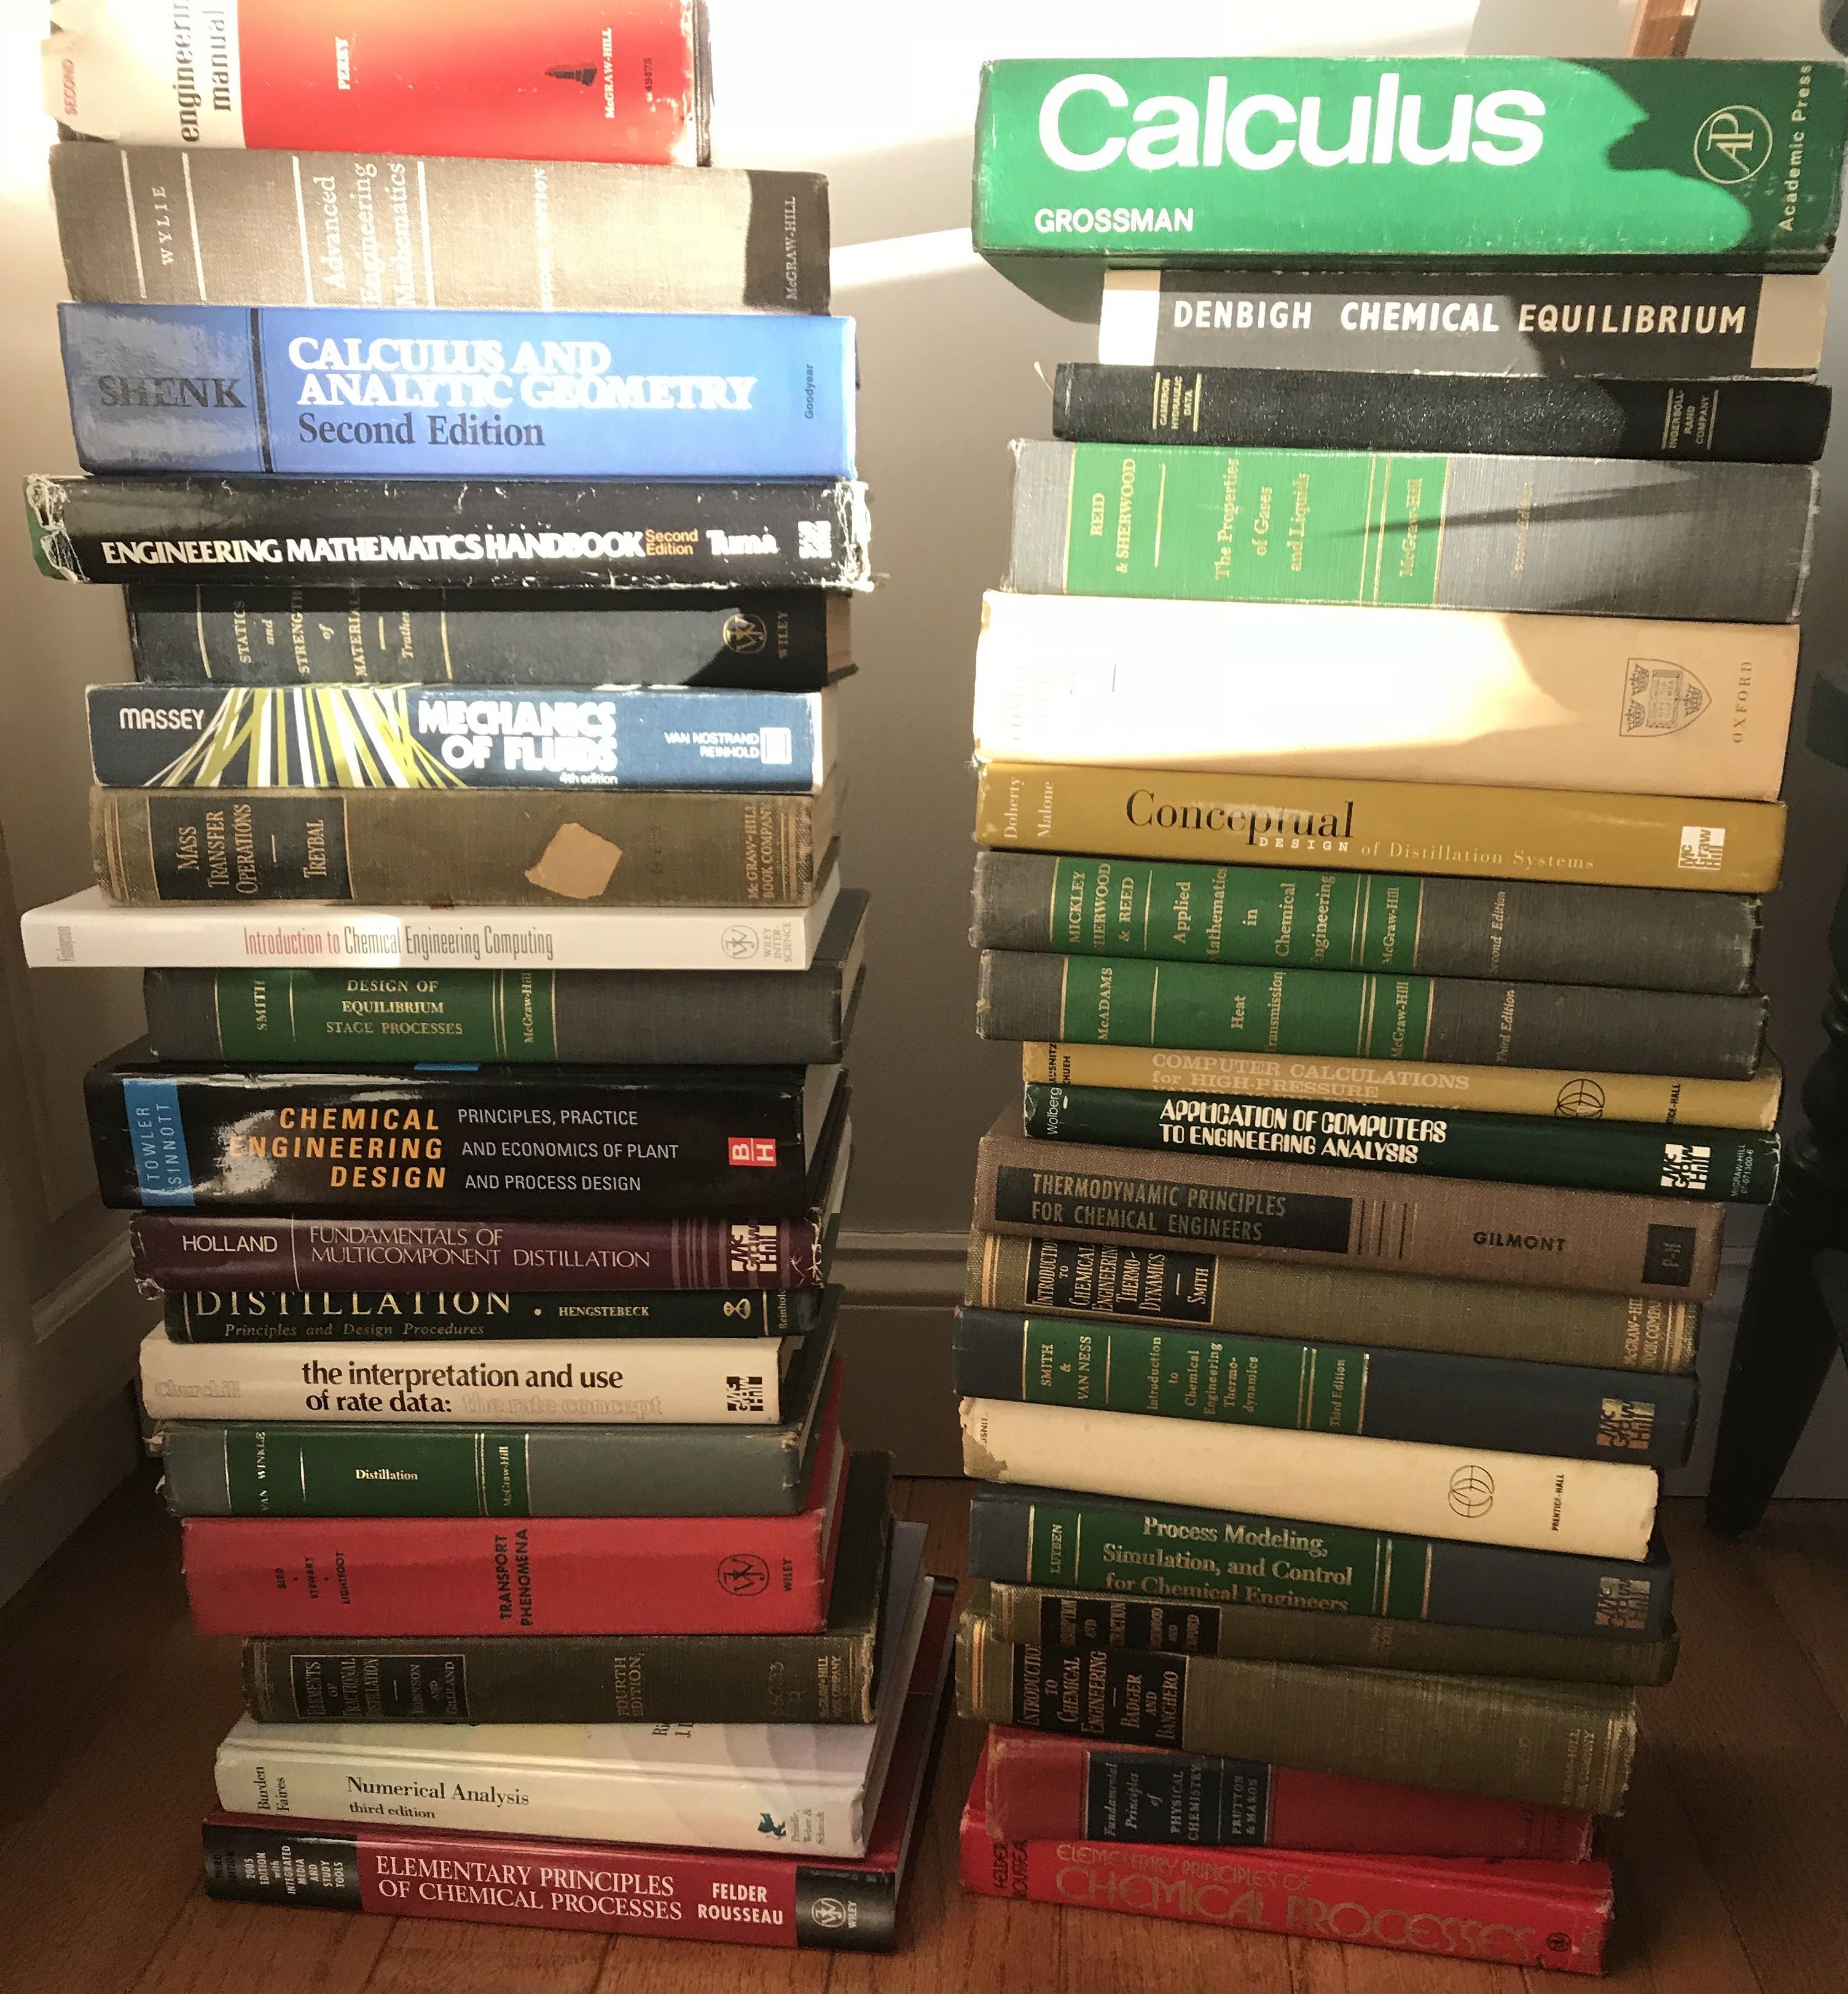 Free technical books, mostly chemical engineering